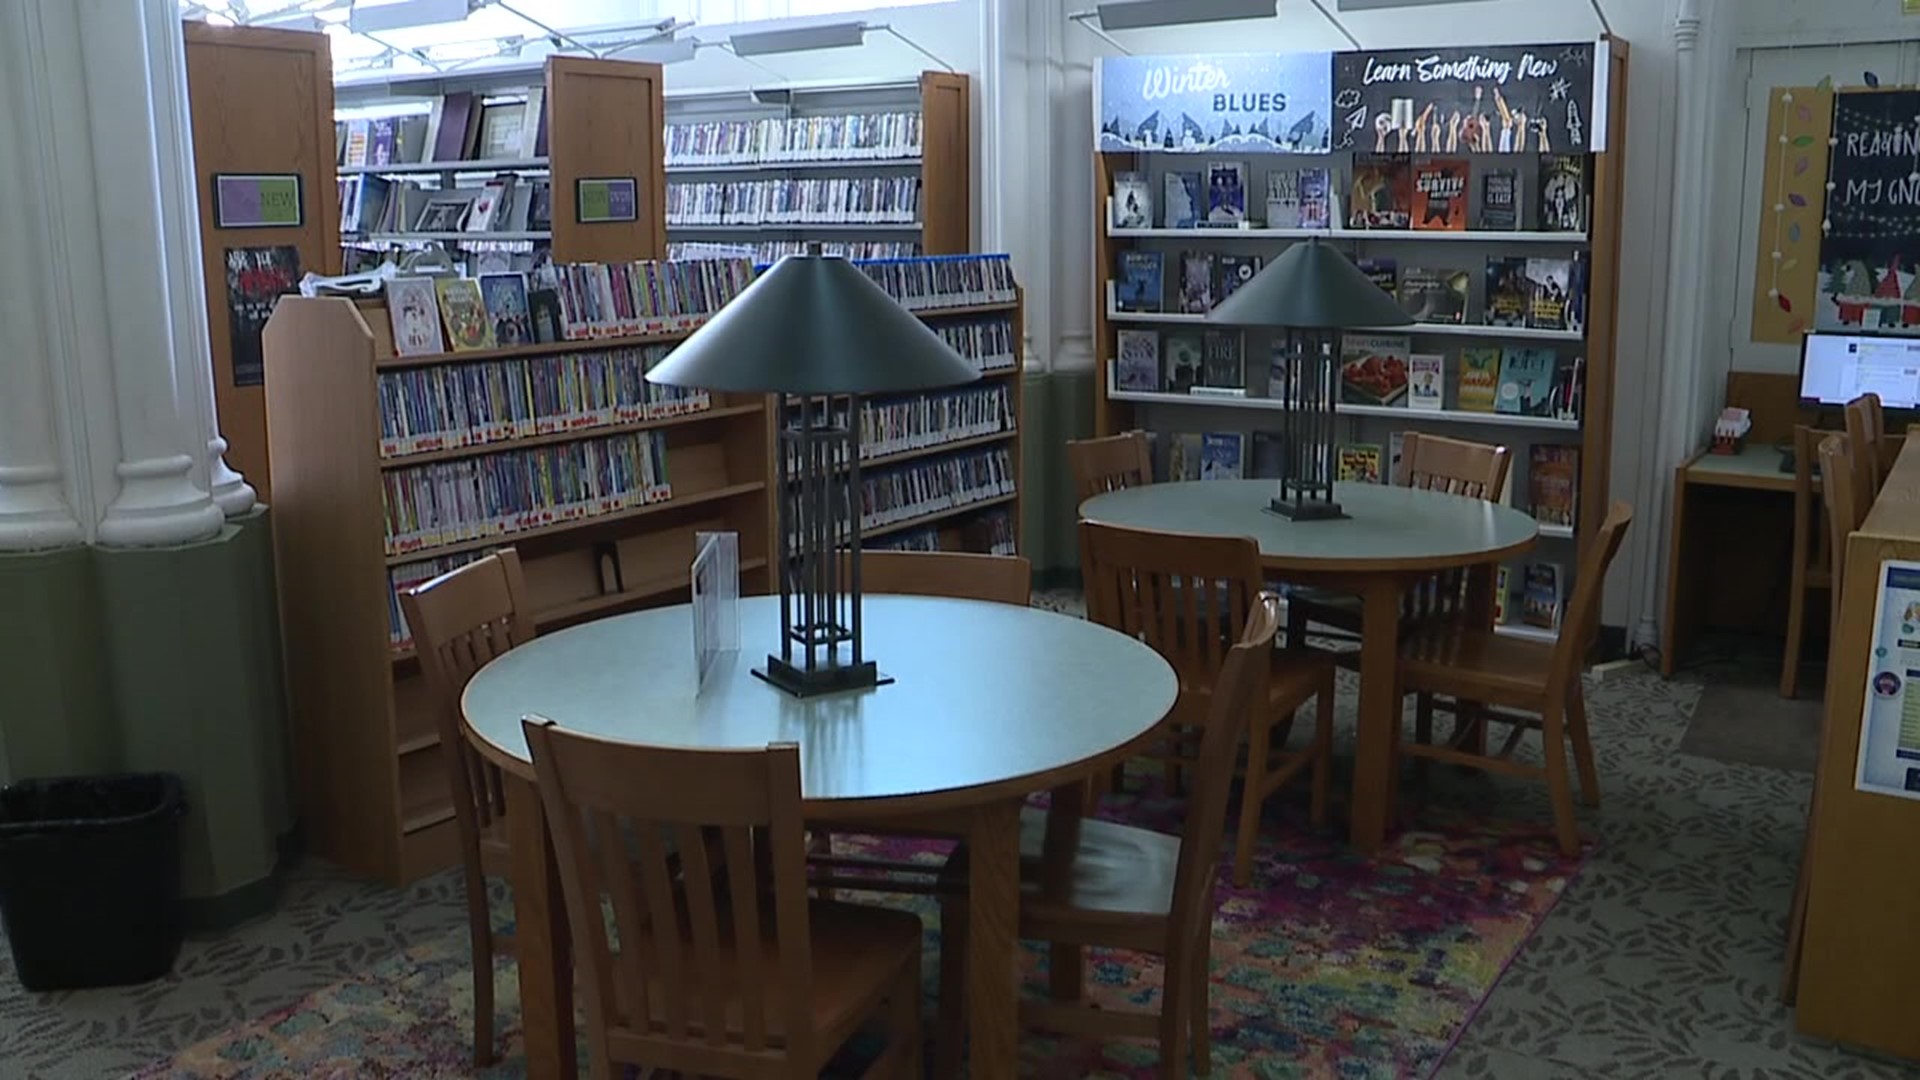 The Osterhout Free Library in Wilkes-Barre has plenty of resources and programs to help with mentally focused goals.